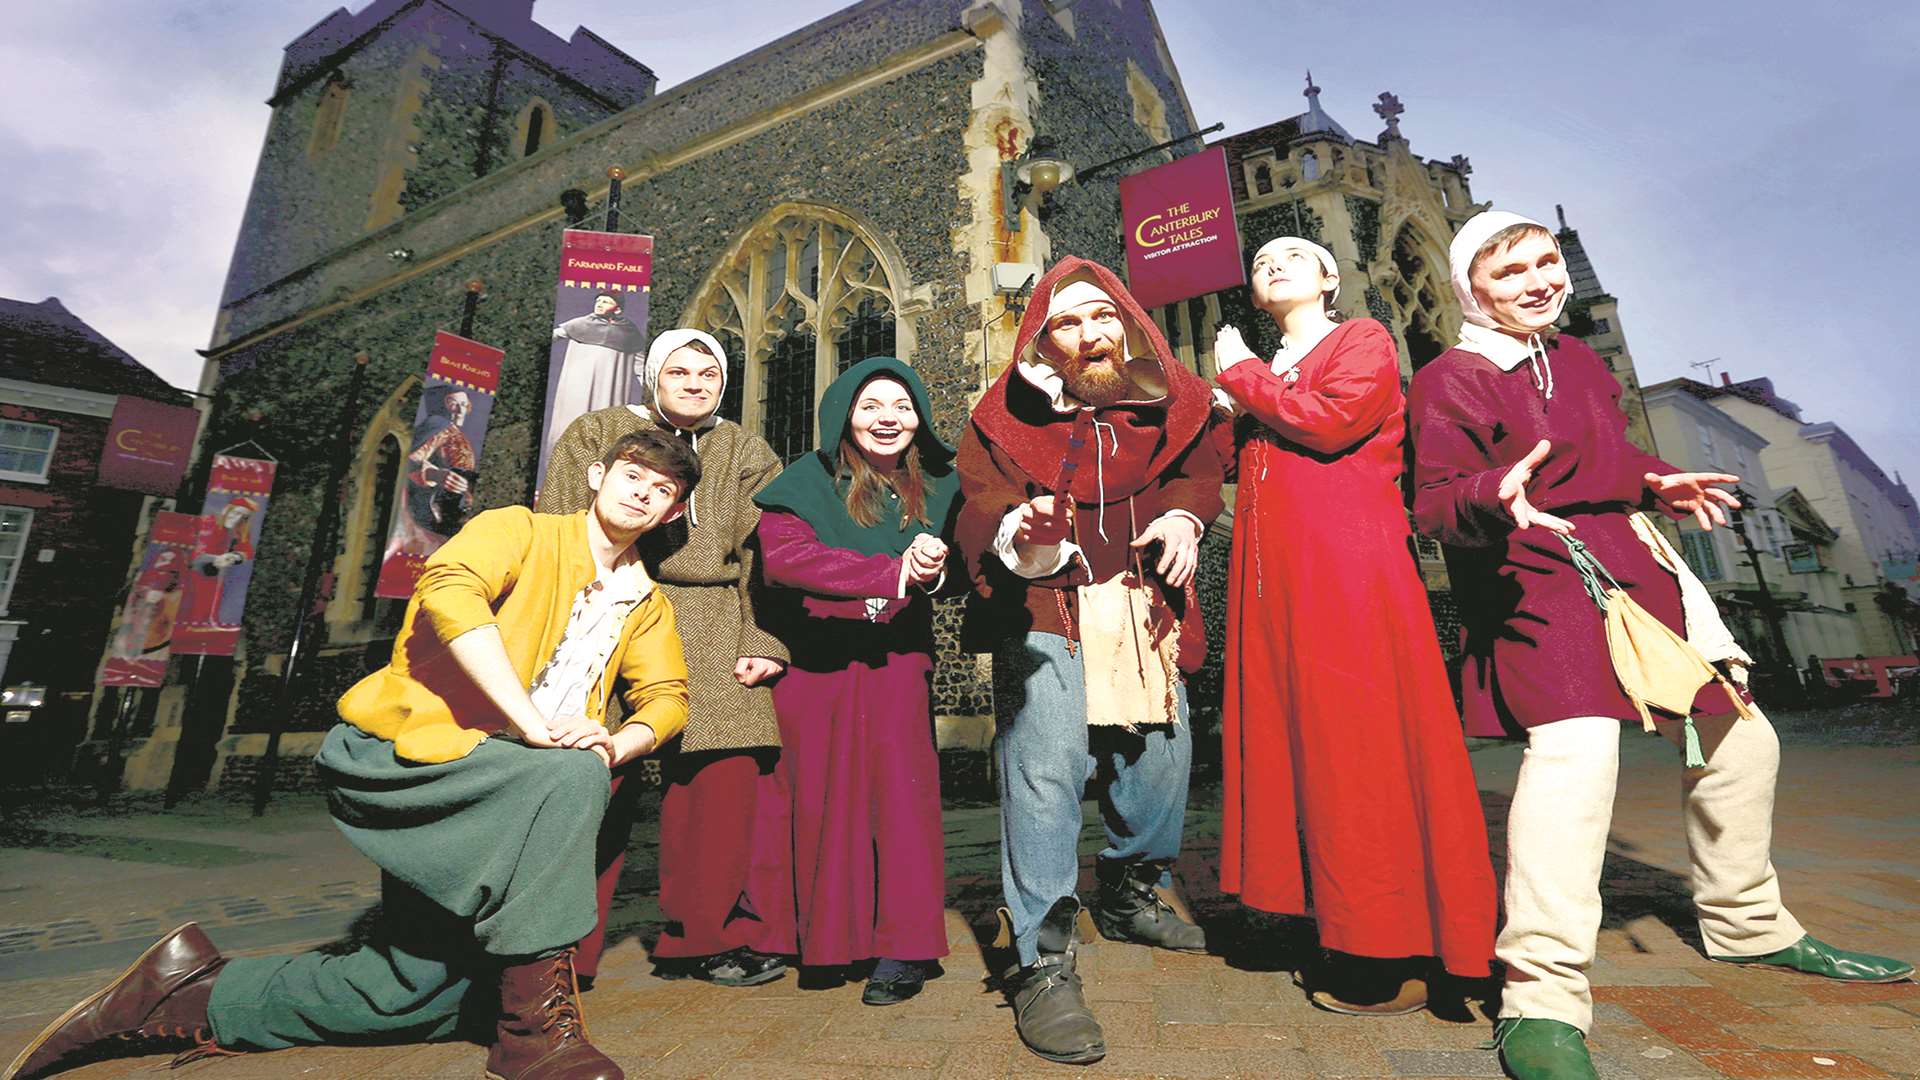 Take an interactive tour through Chaucer's tales, meeting costumed characters and pilgrims along the way